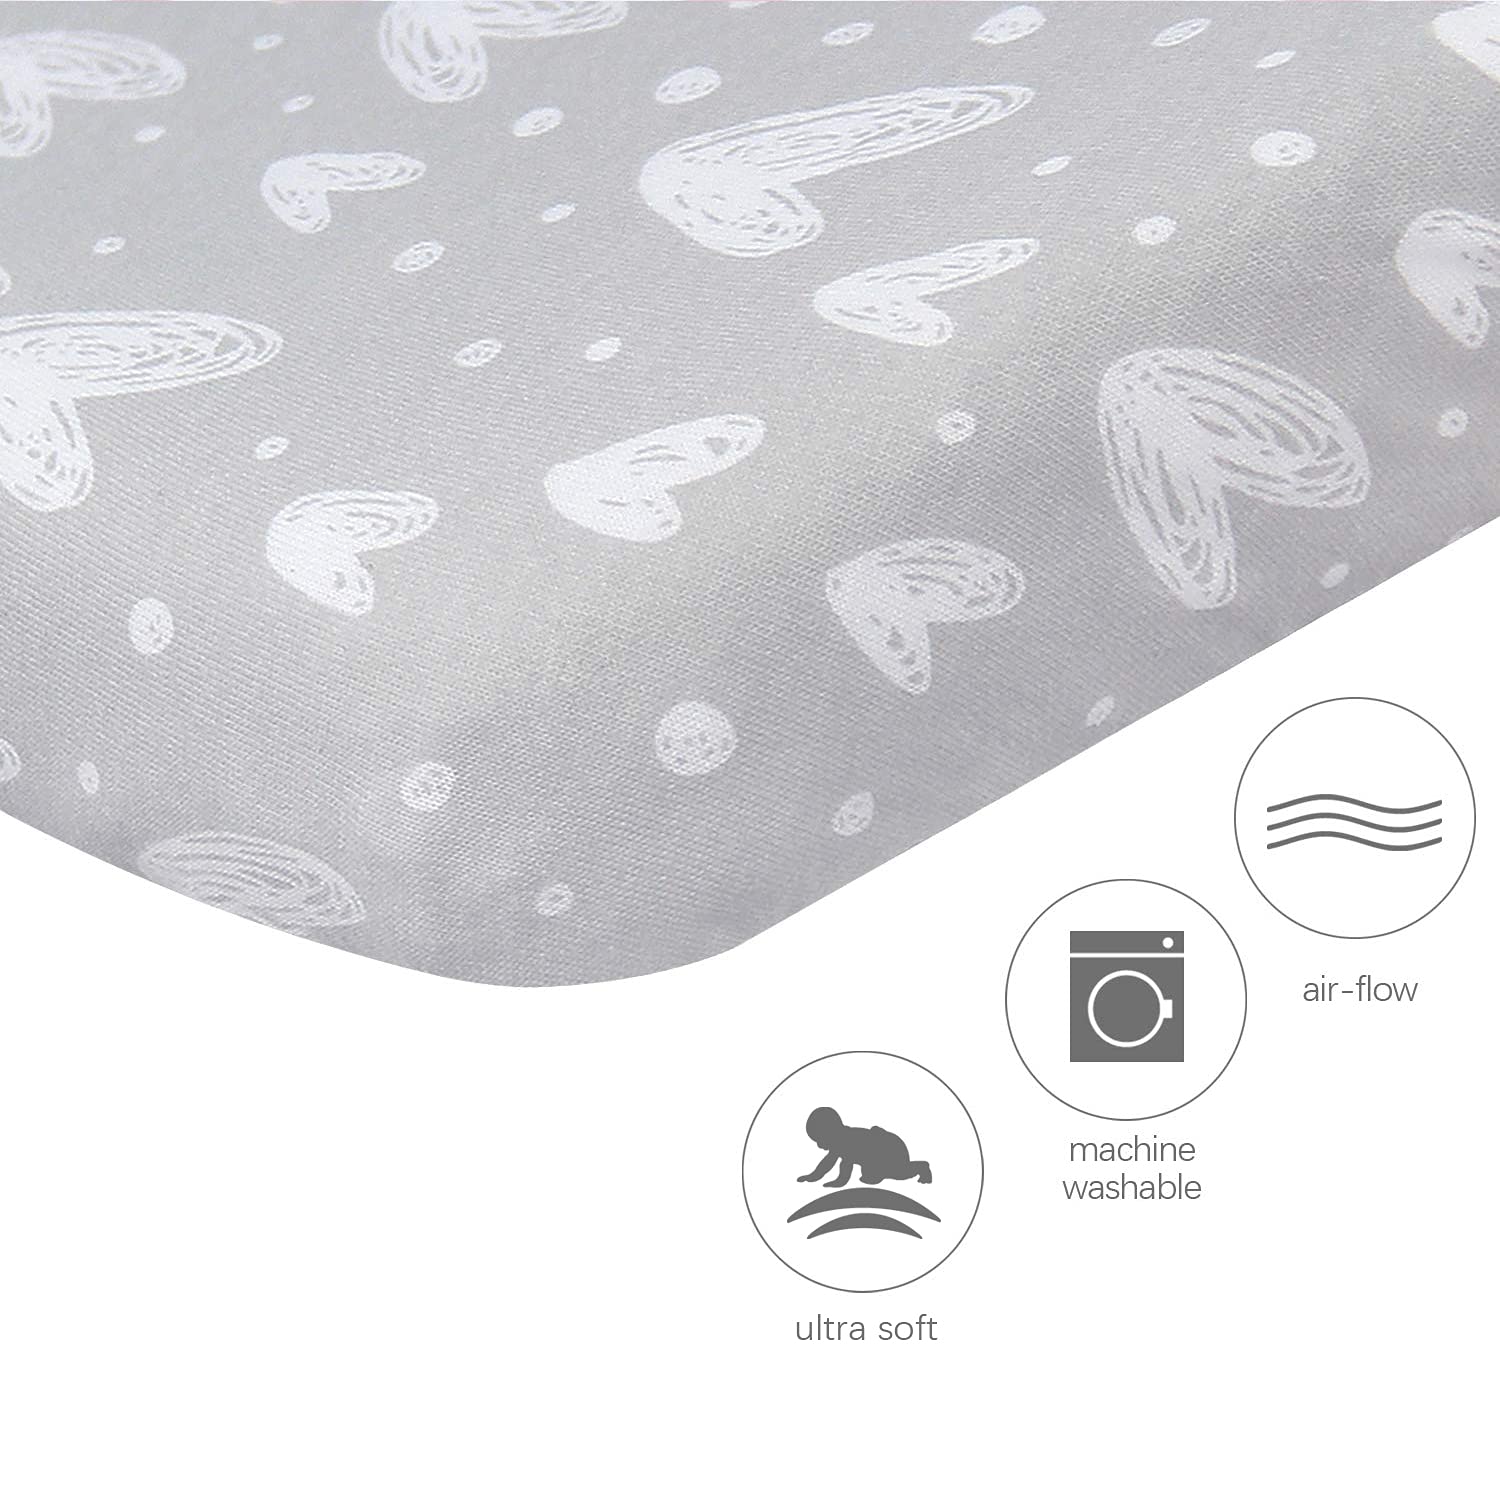 Changing Pad Cover - 2 Pack, 100% Jersey Knit Cotton - Biloban Online Store